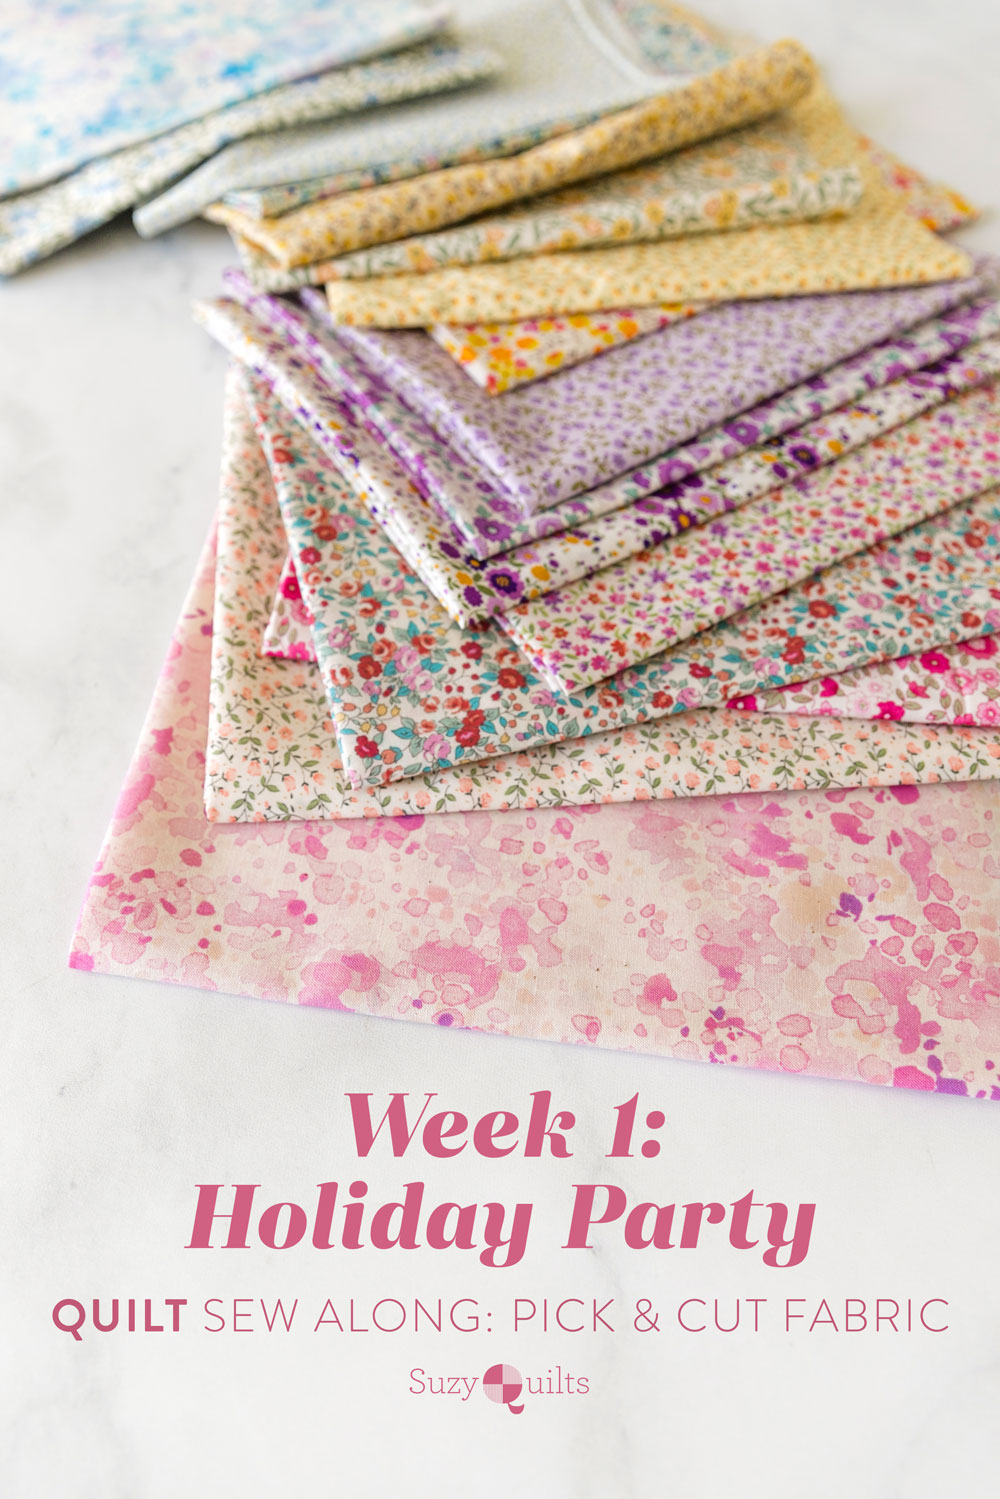 The Holiday Party quilt along includes lots of extra instruction and tips in sewing this fat quarter friendly modern throw quilt. suzyquilts.com